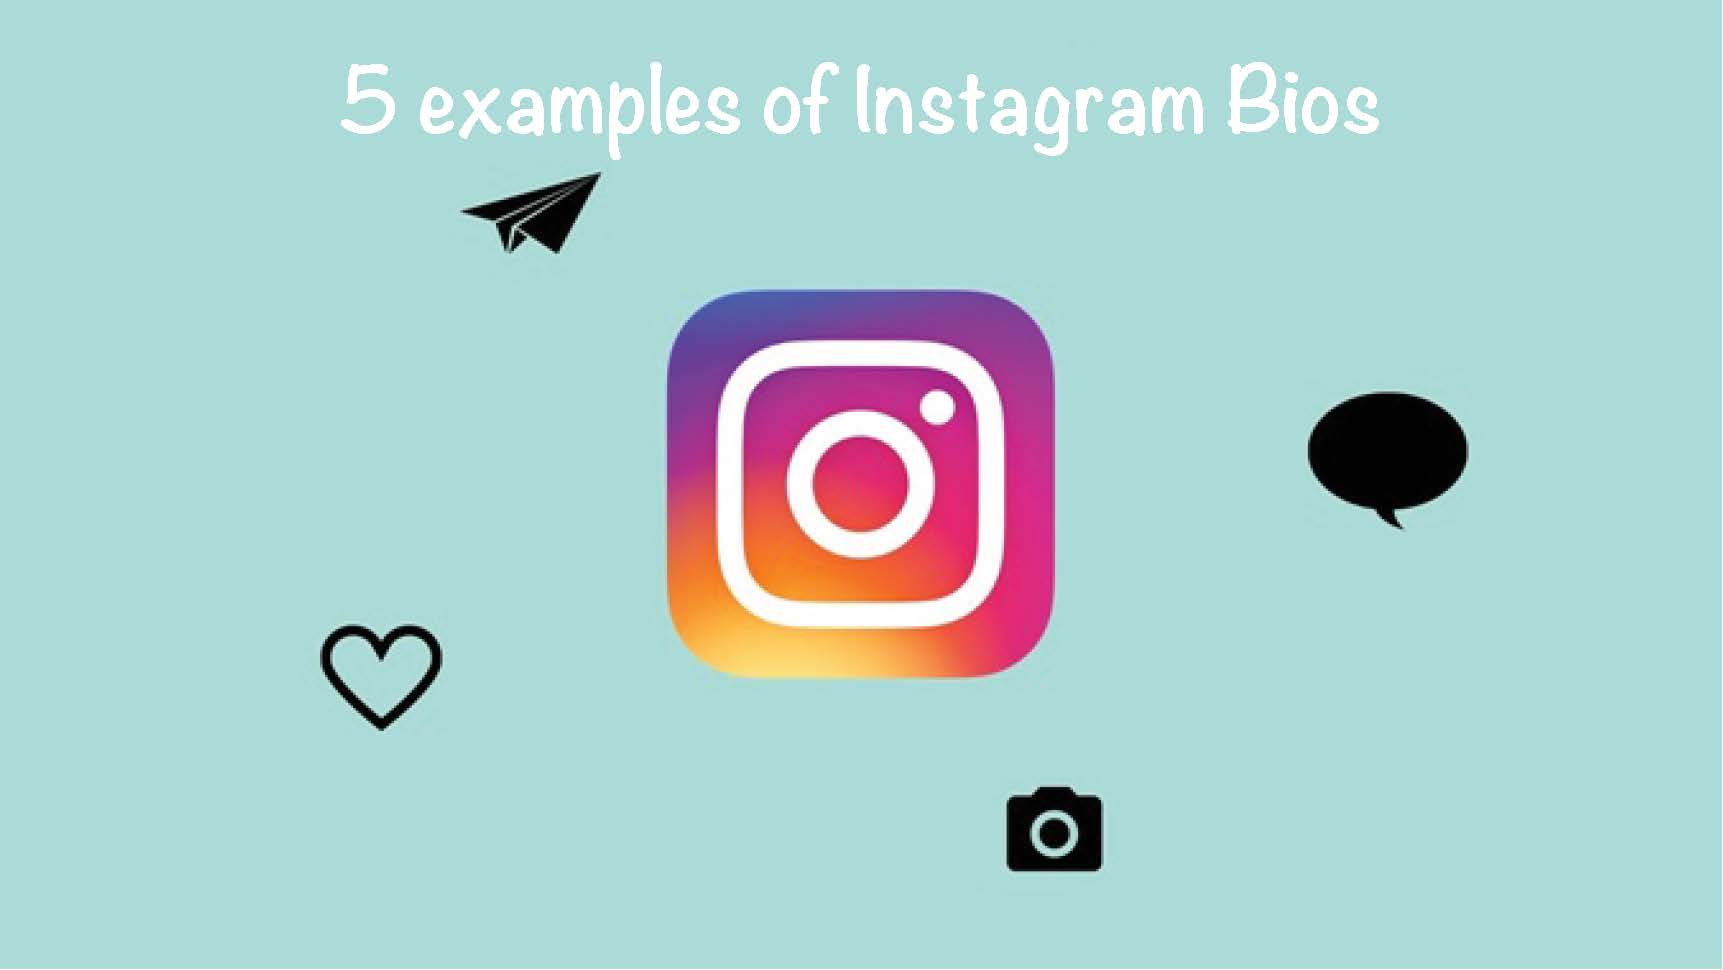 5 examples of Instagram Bios to copy and paste